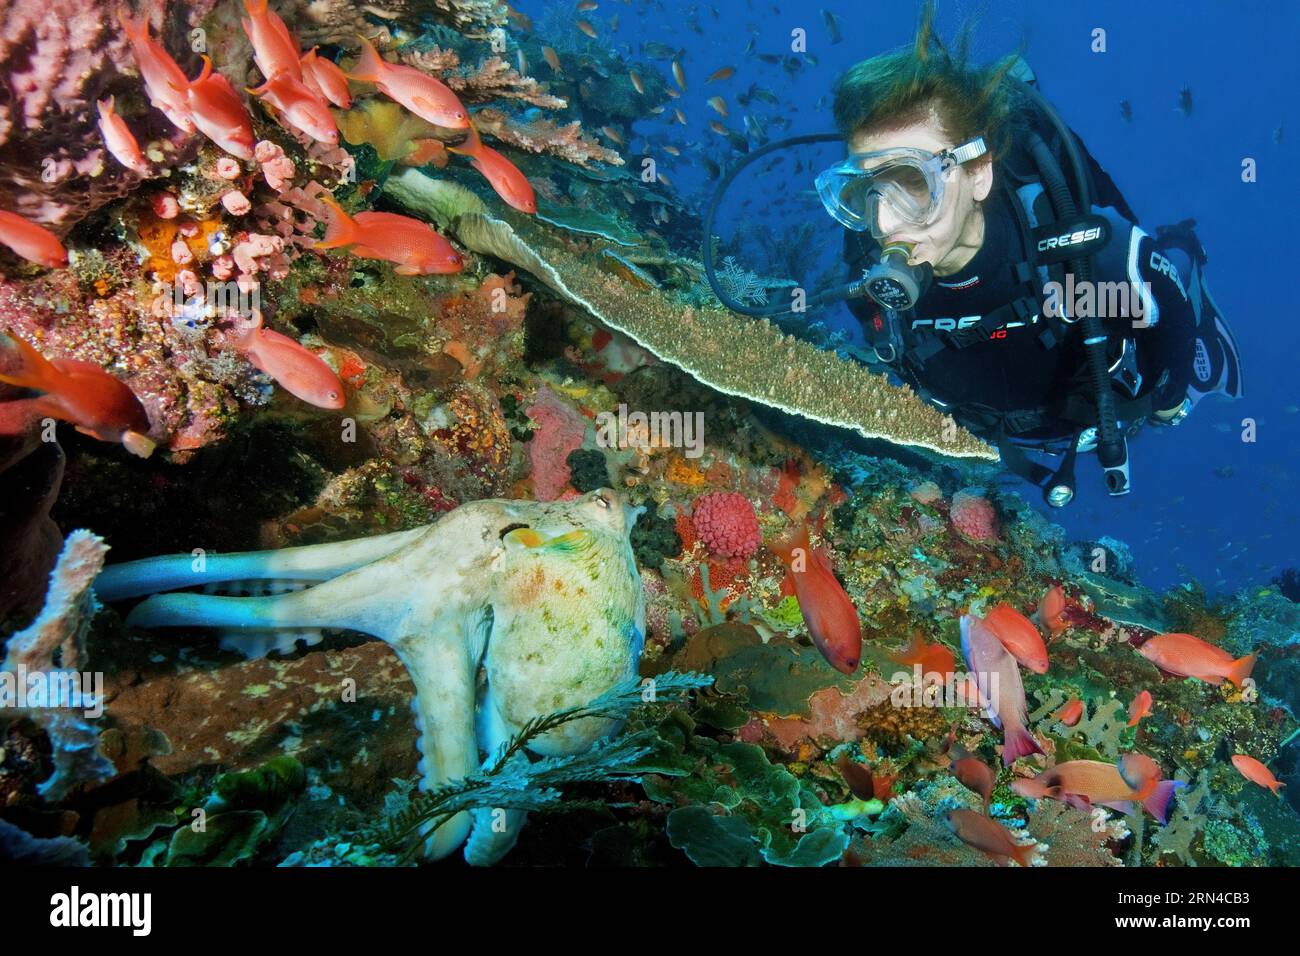 Female diver looking at octopus (Octopus vulgaris) hiding seeking shelter under table coral (Acroporidae) in coral reef, on right shoal of sea Stock Photo